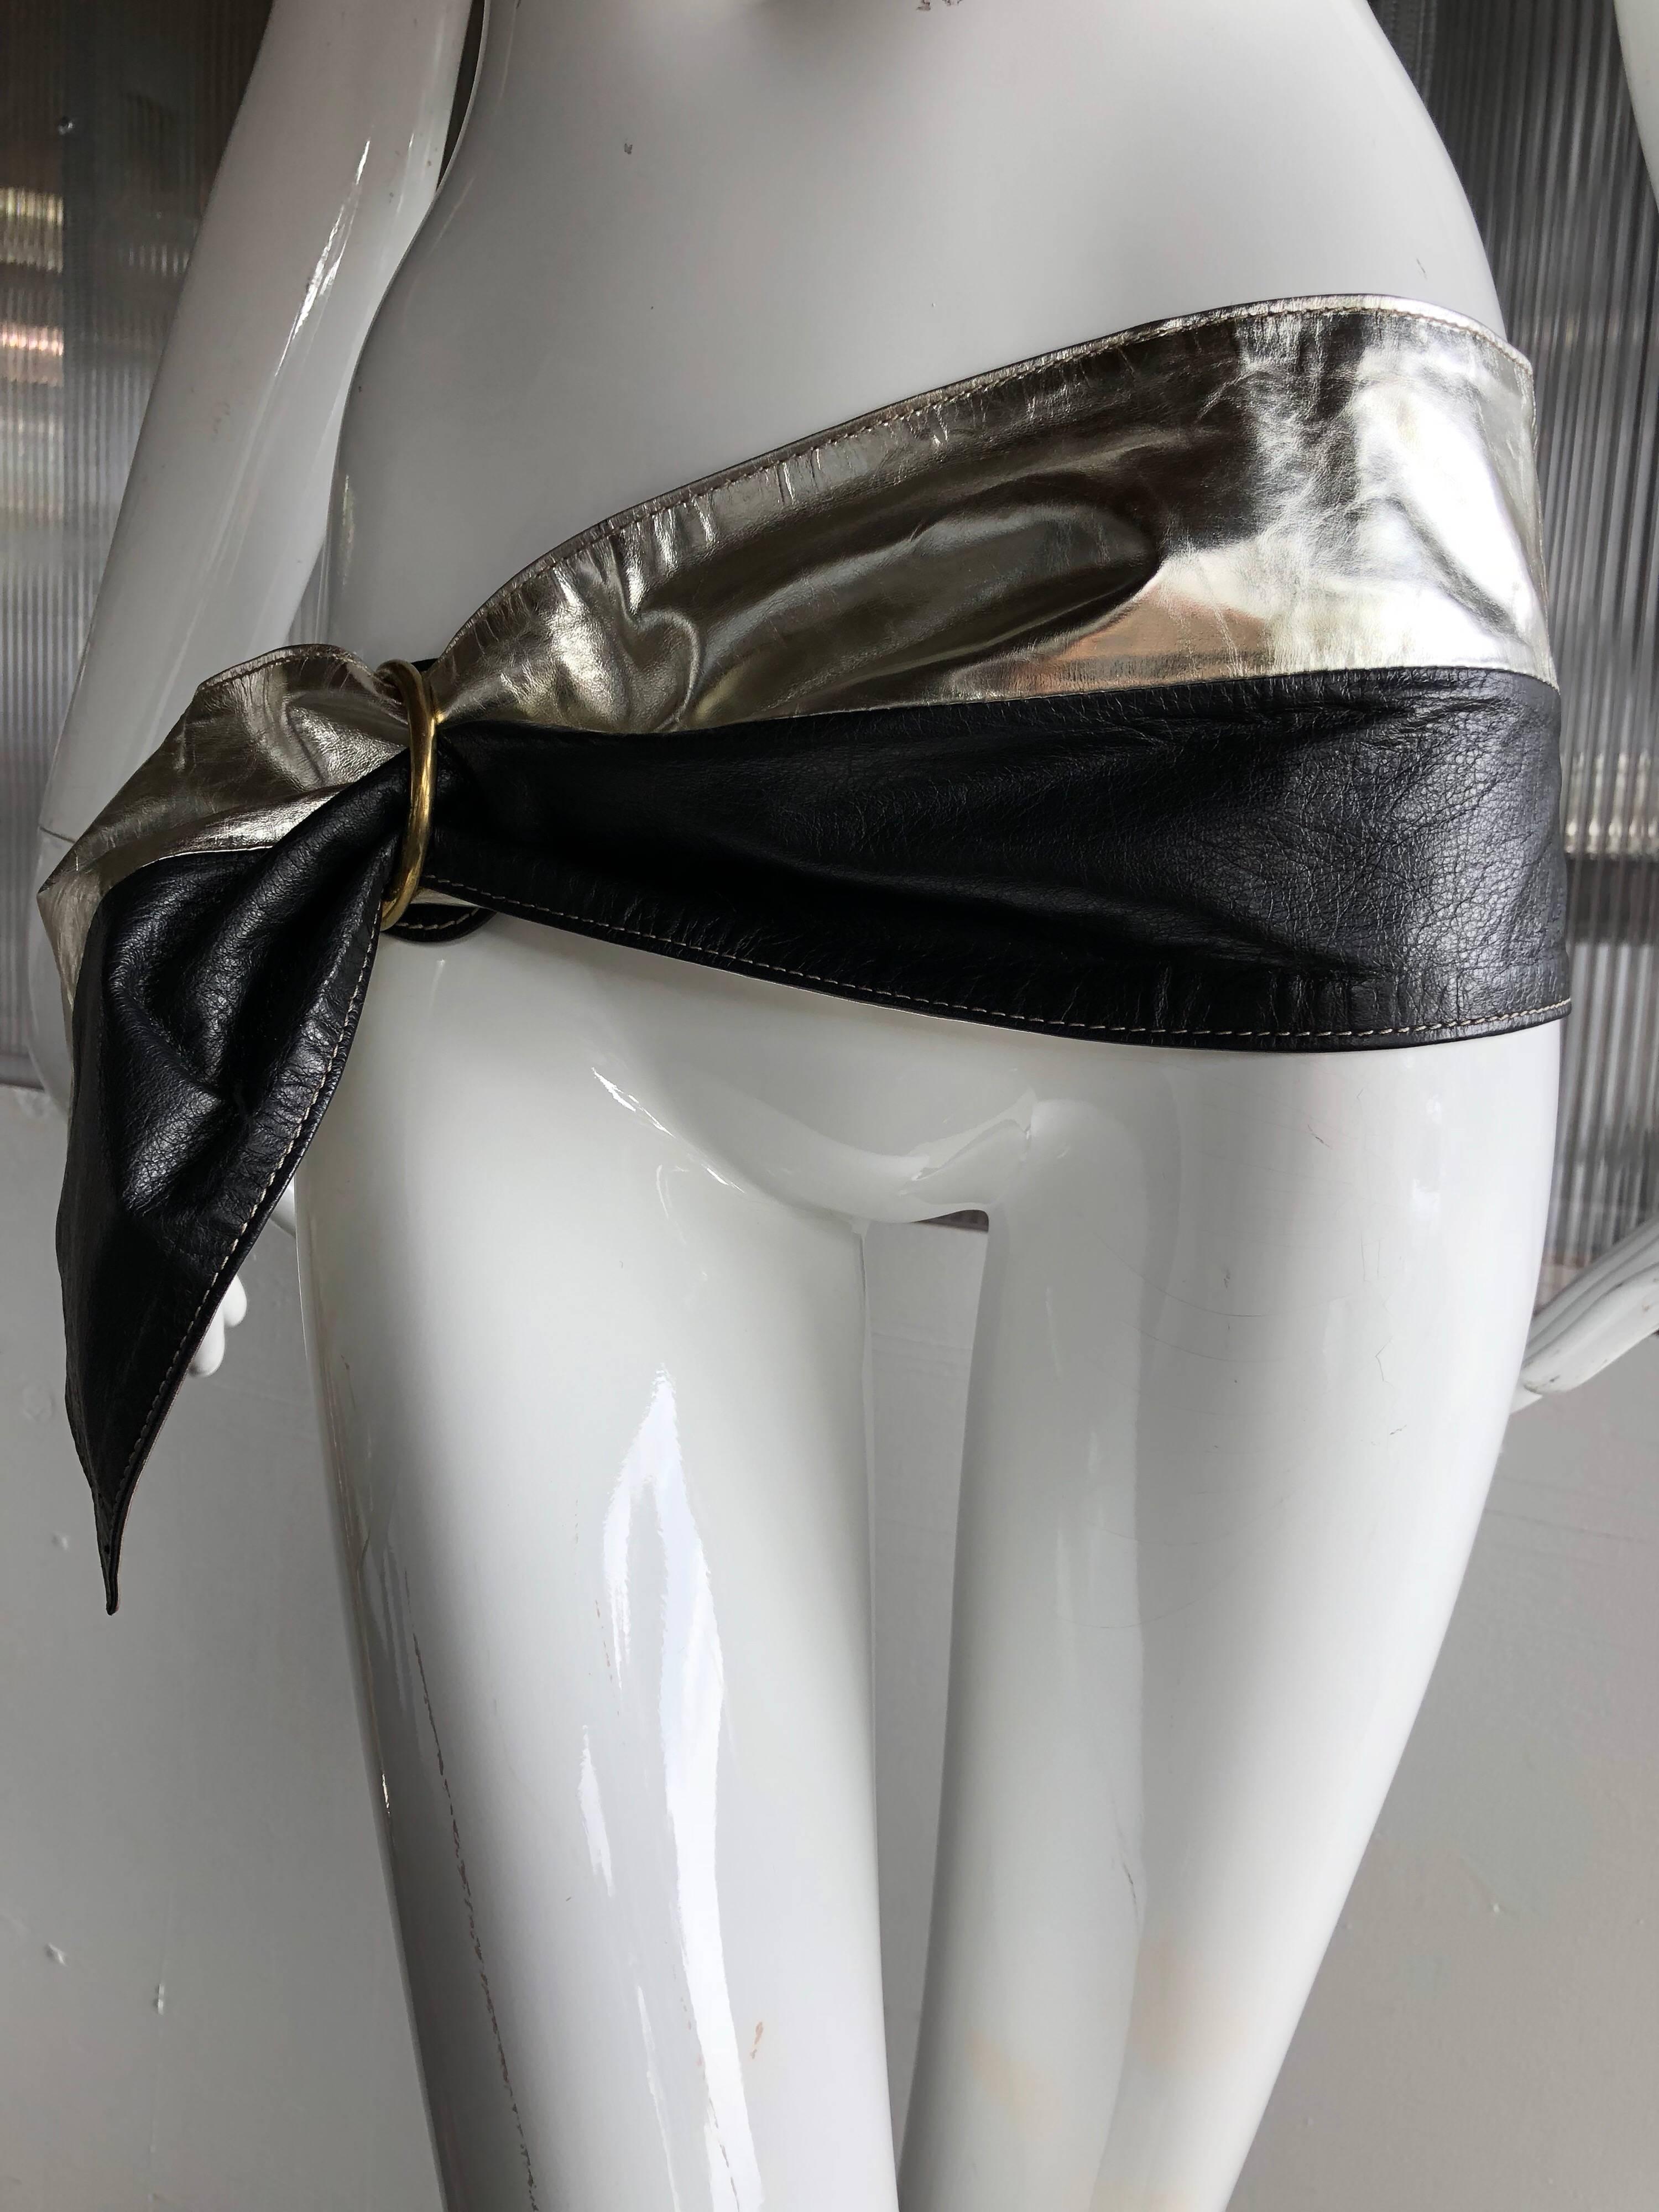 Dramatic 1980s silver and black leather belt made in Italy. One metal ring hardware adjusts the belt to desired size and width. 
Bold and beautiful!